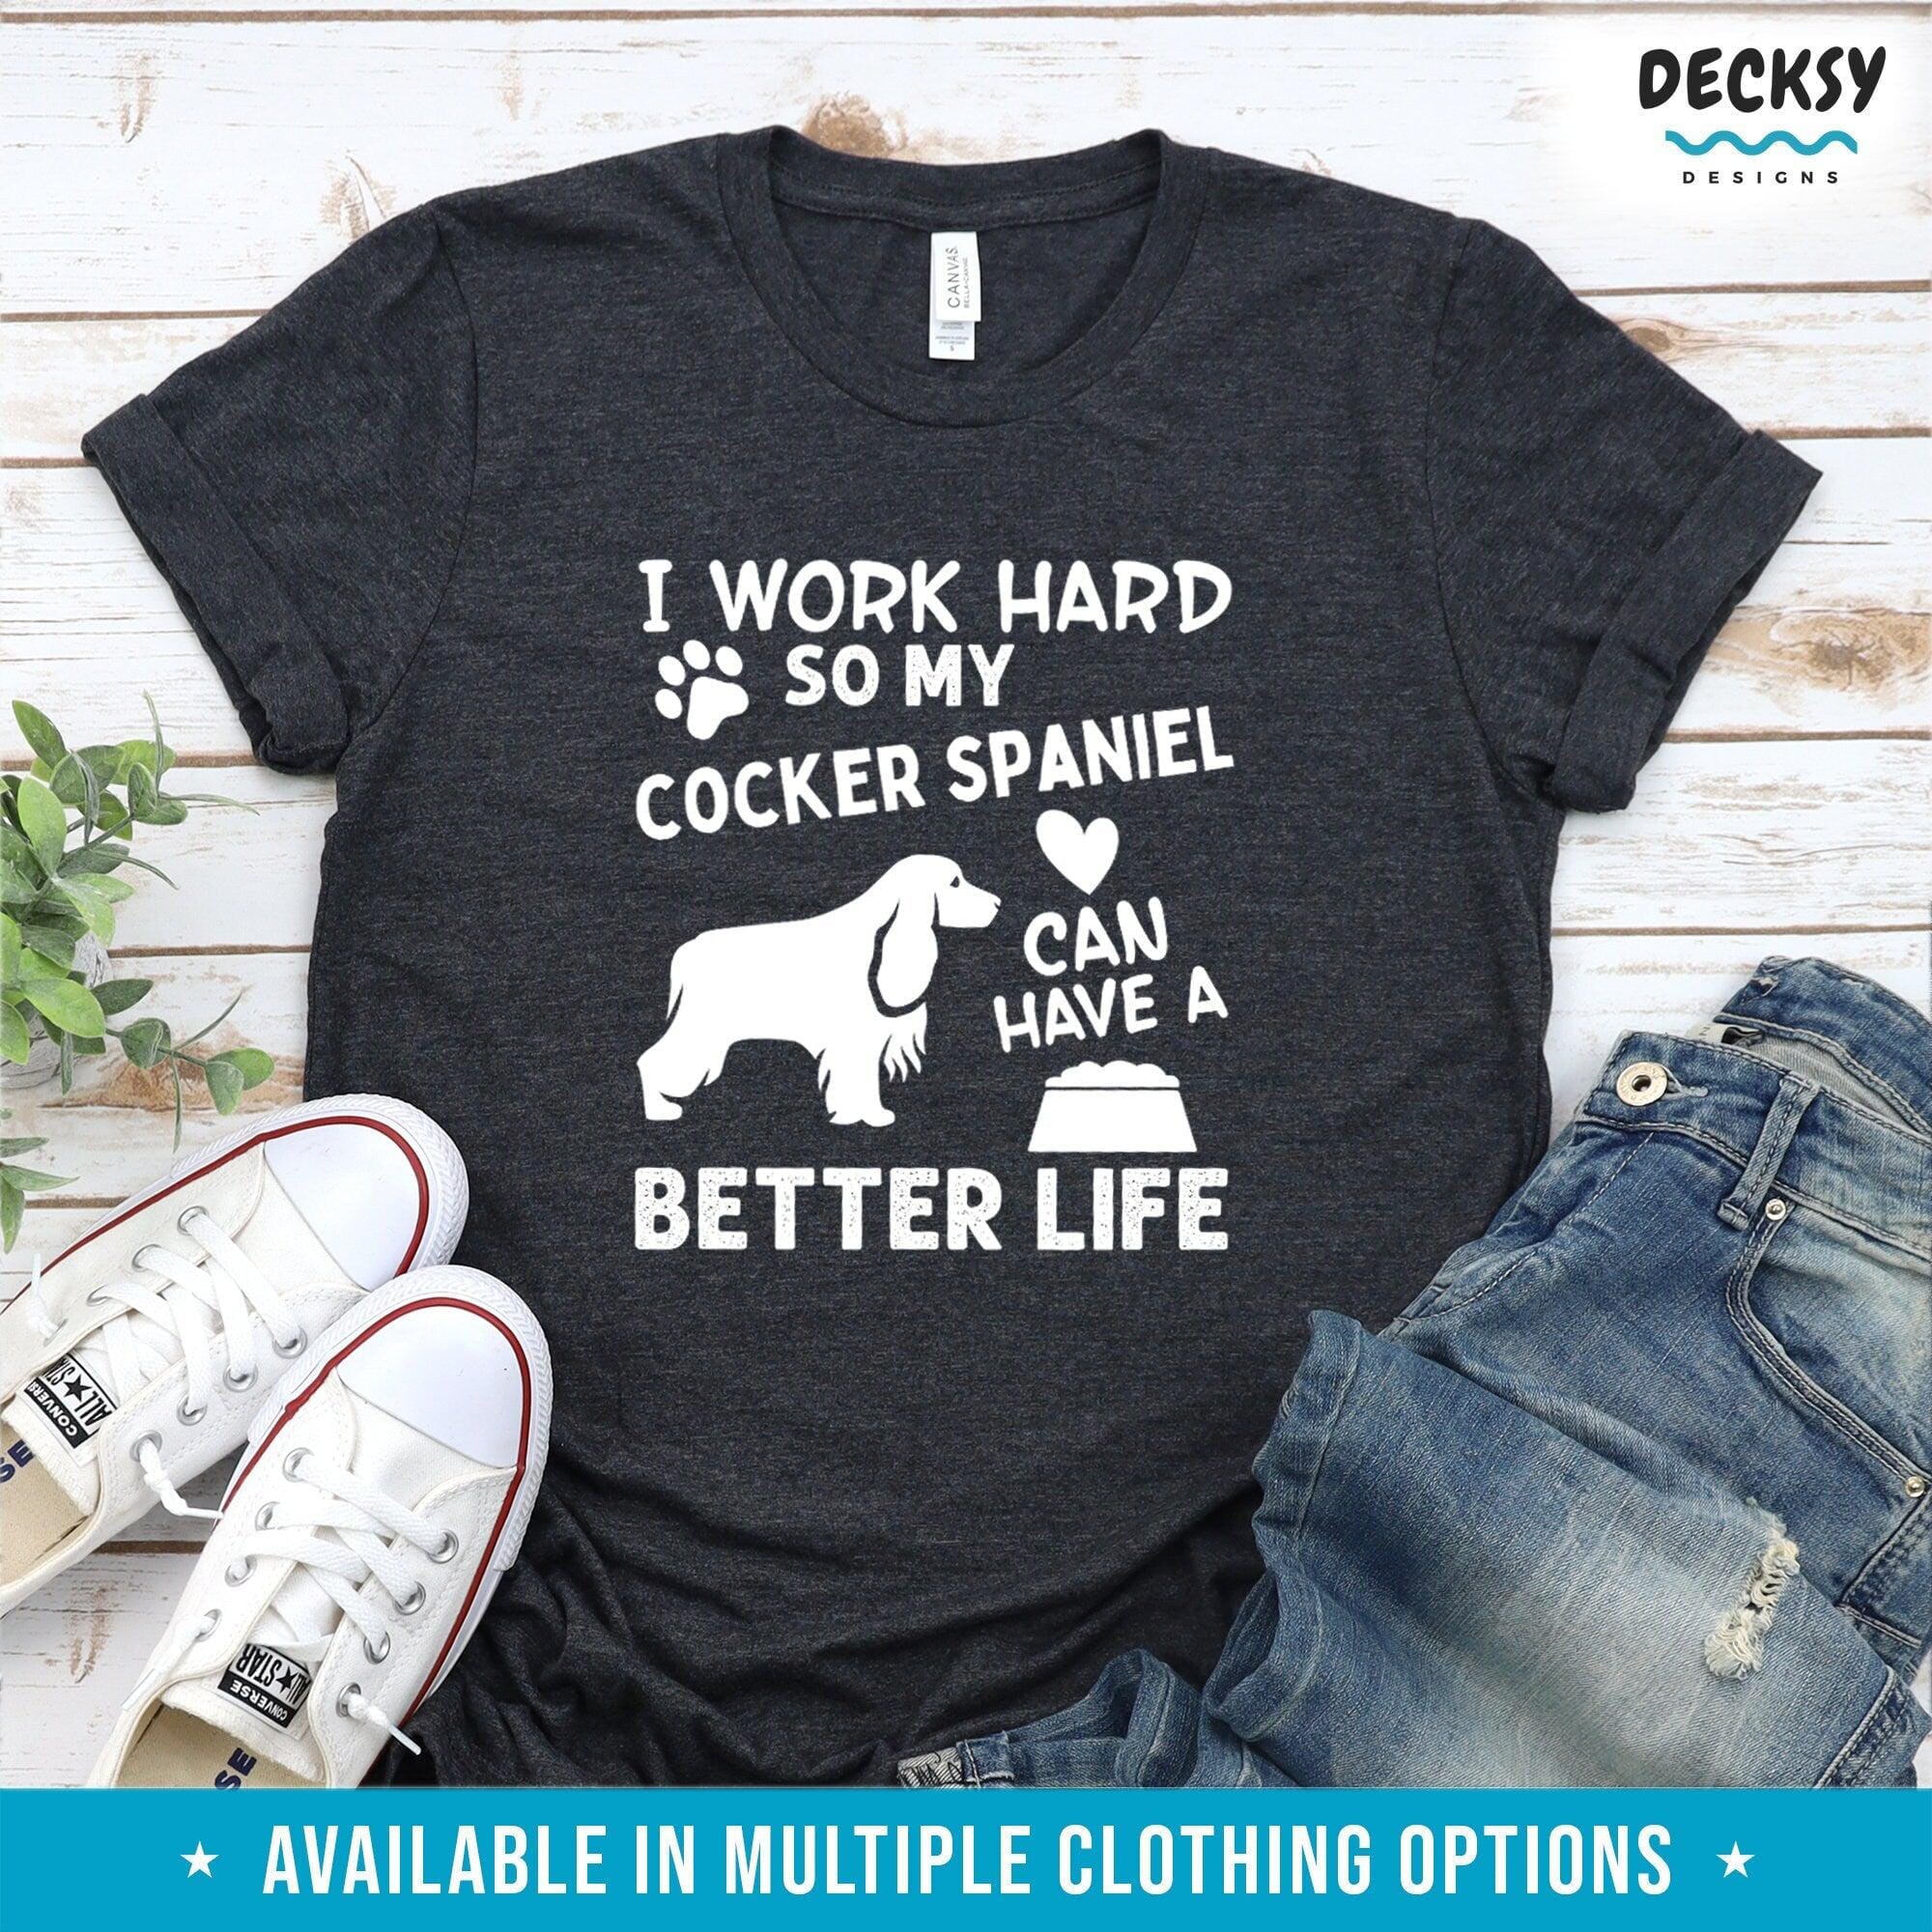 Cocker Spaniel Shirt, Dog Lover Gift-Clothing:Gender-Neutral Adult Clothing:Tops & Tees:T-shirts:Graphic Tees-DecksyDesigns